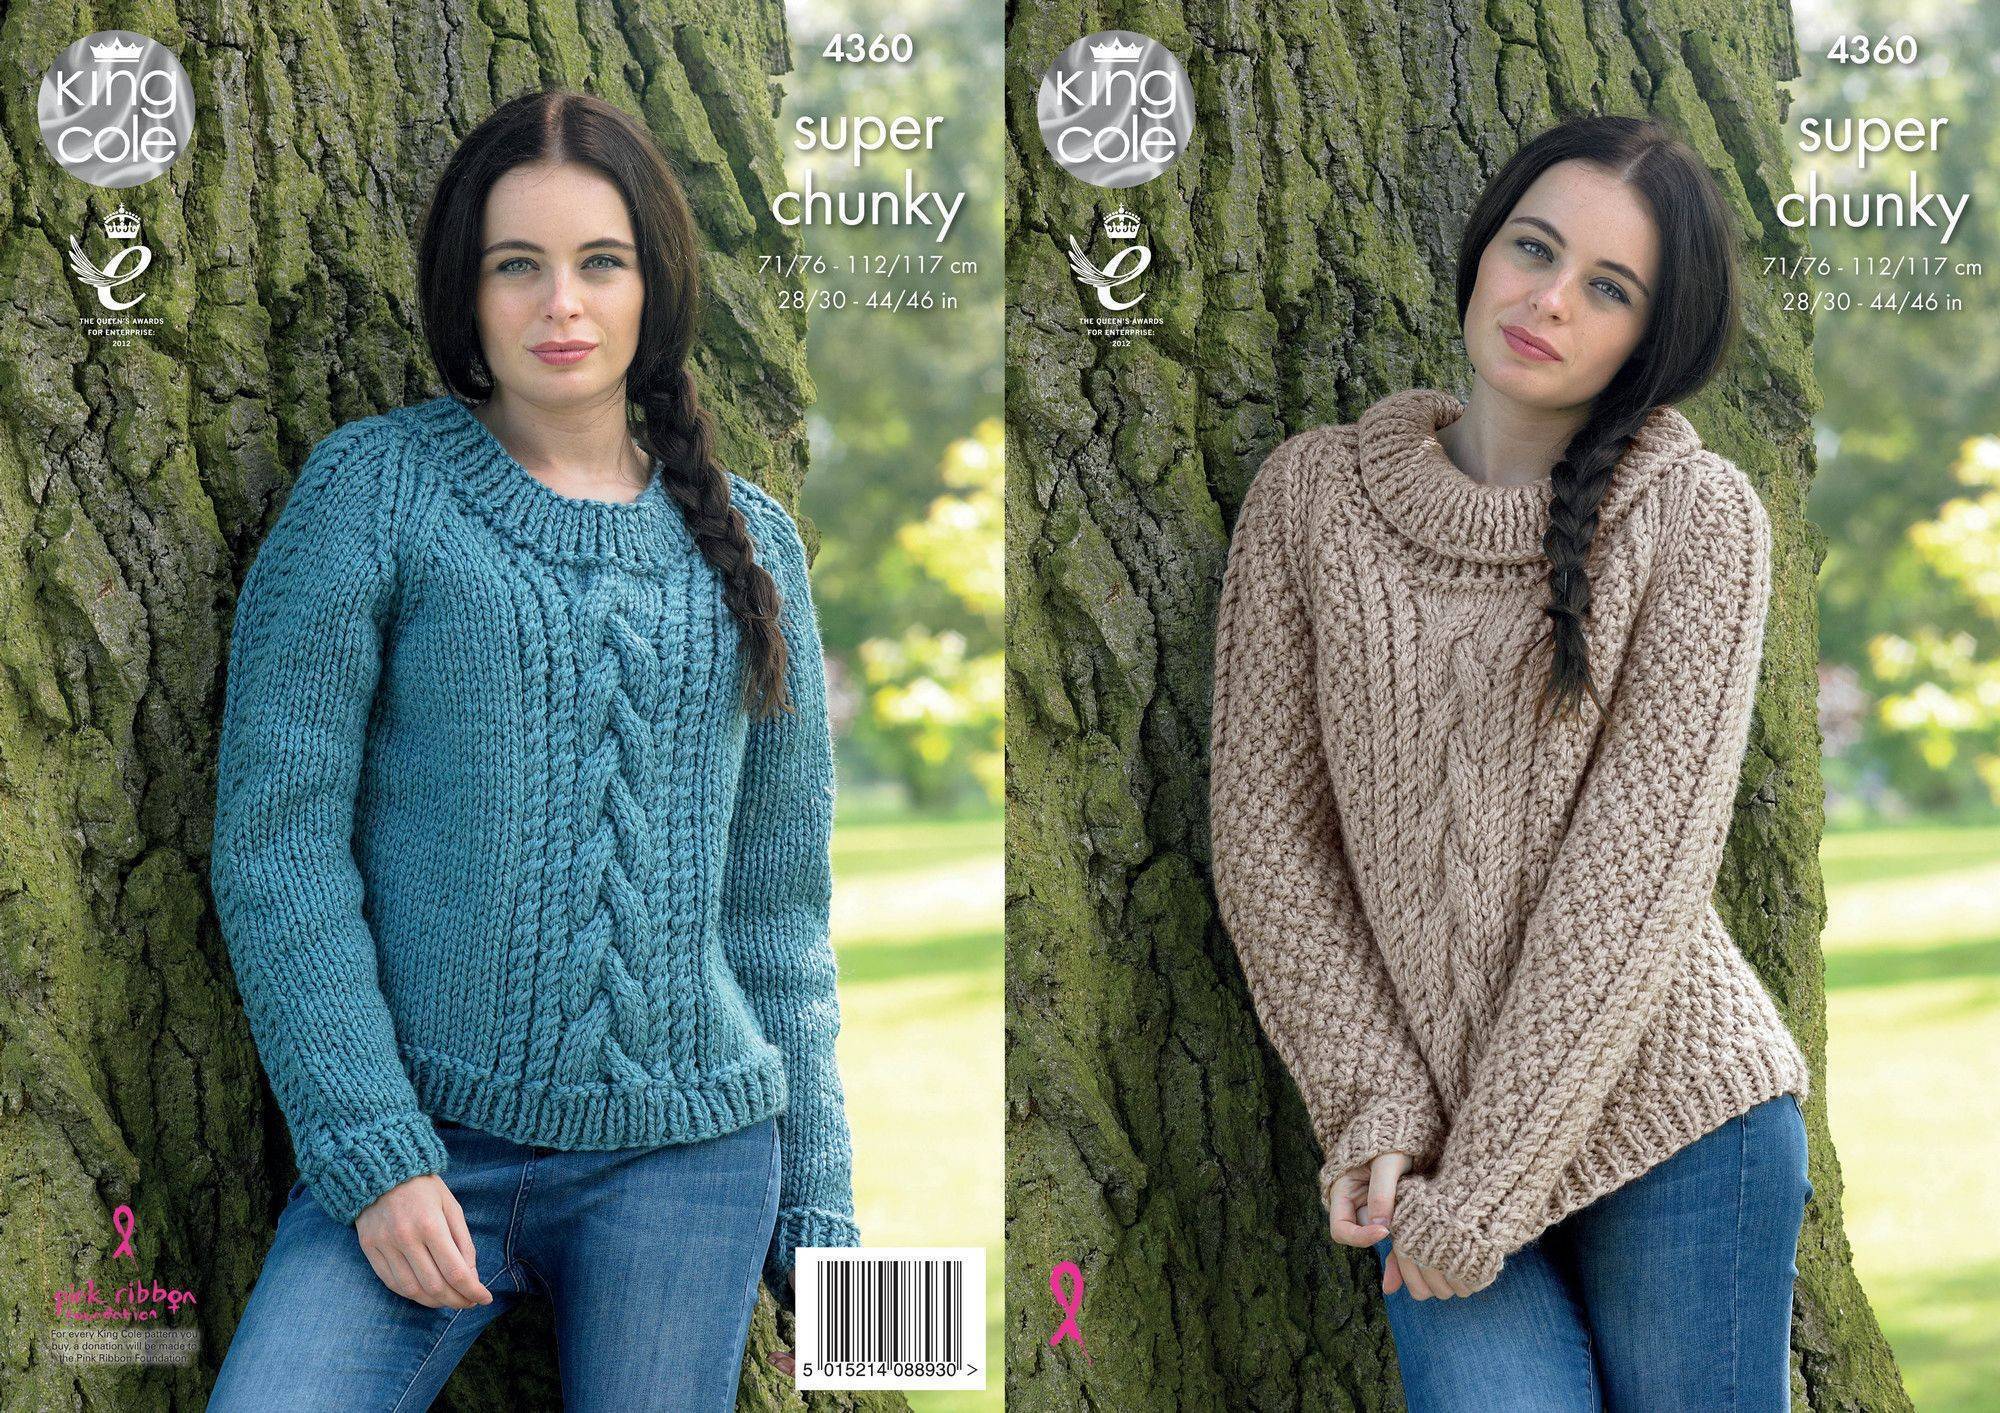 Sweaters in King Cole Big Value Super Chunky (4360) | The Knitting Network